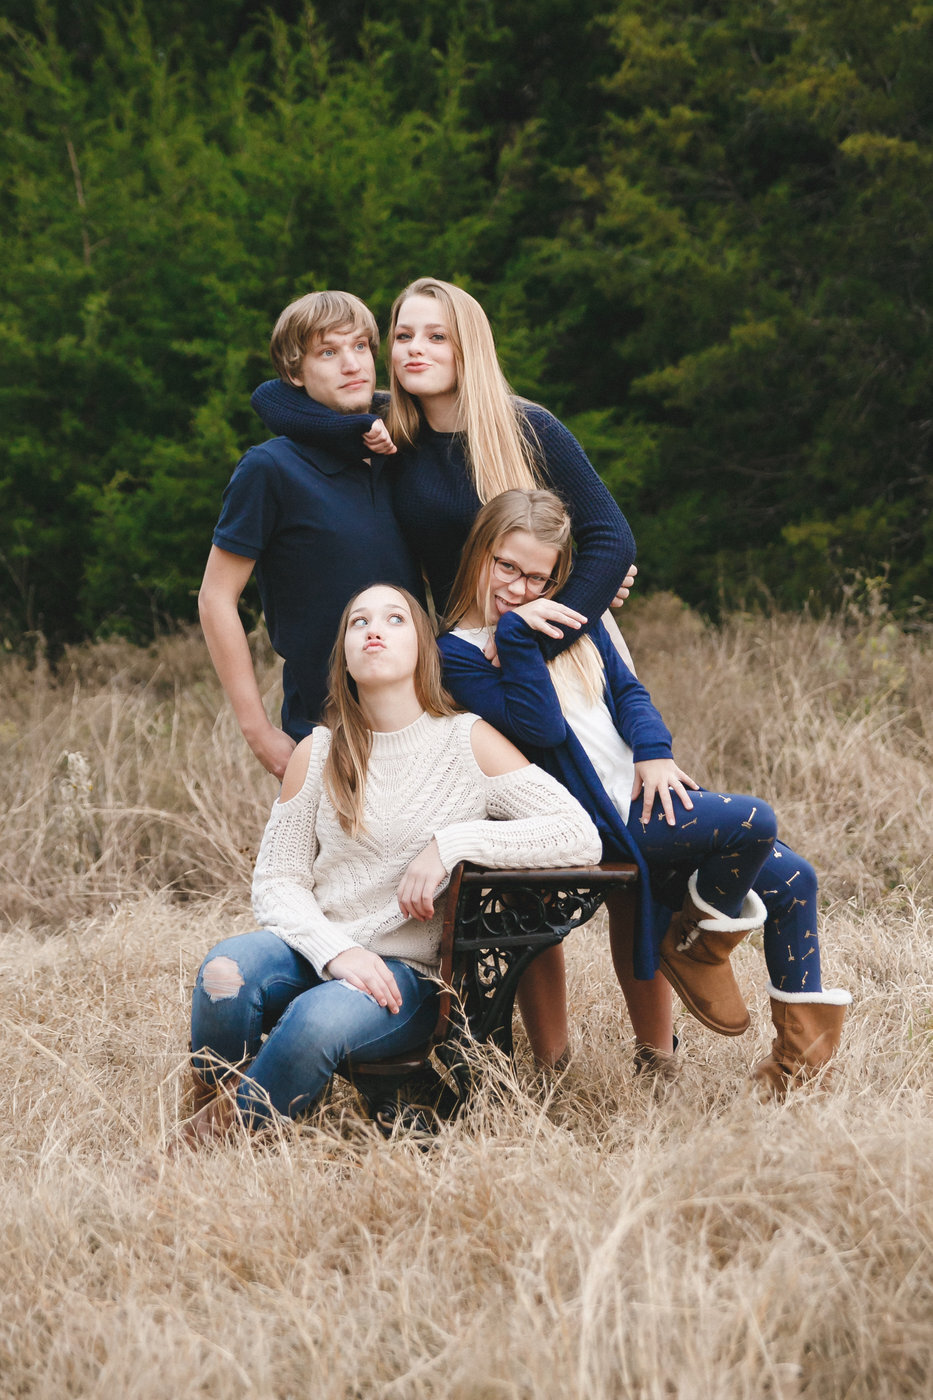 Caleb and his sisters - Caleb loves his sisters and will often put up with their silliness and shenanigans!